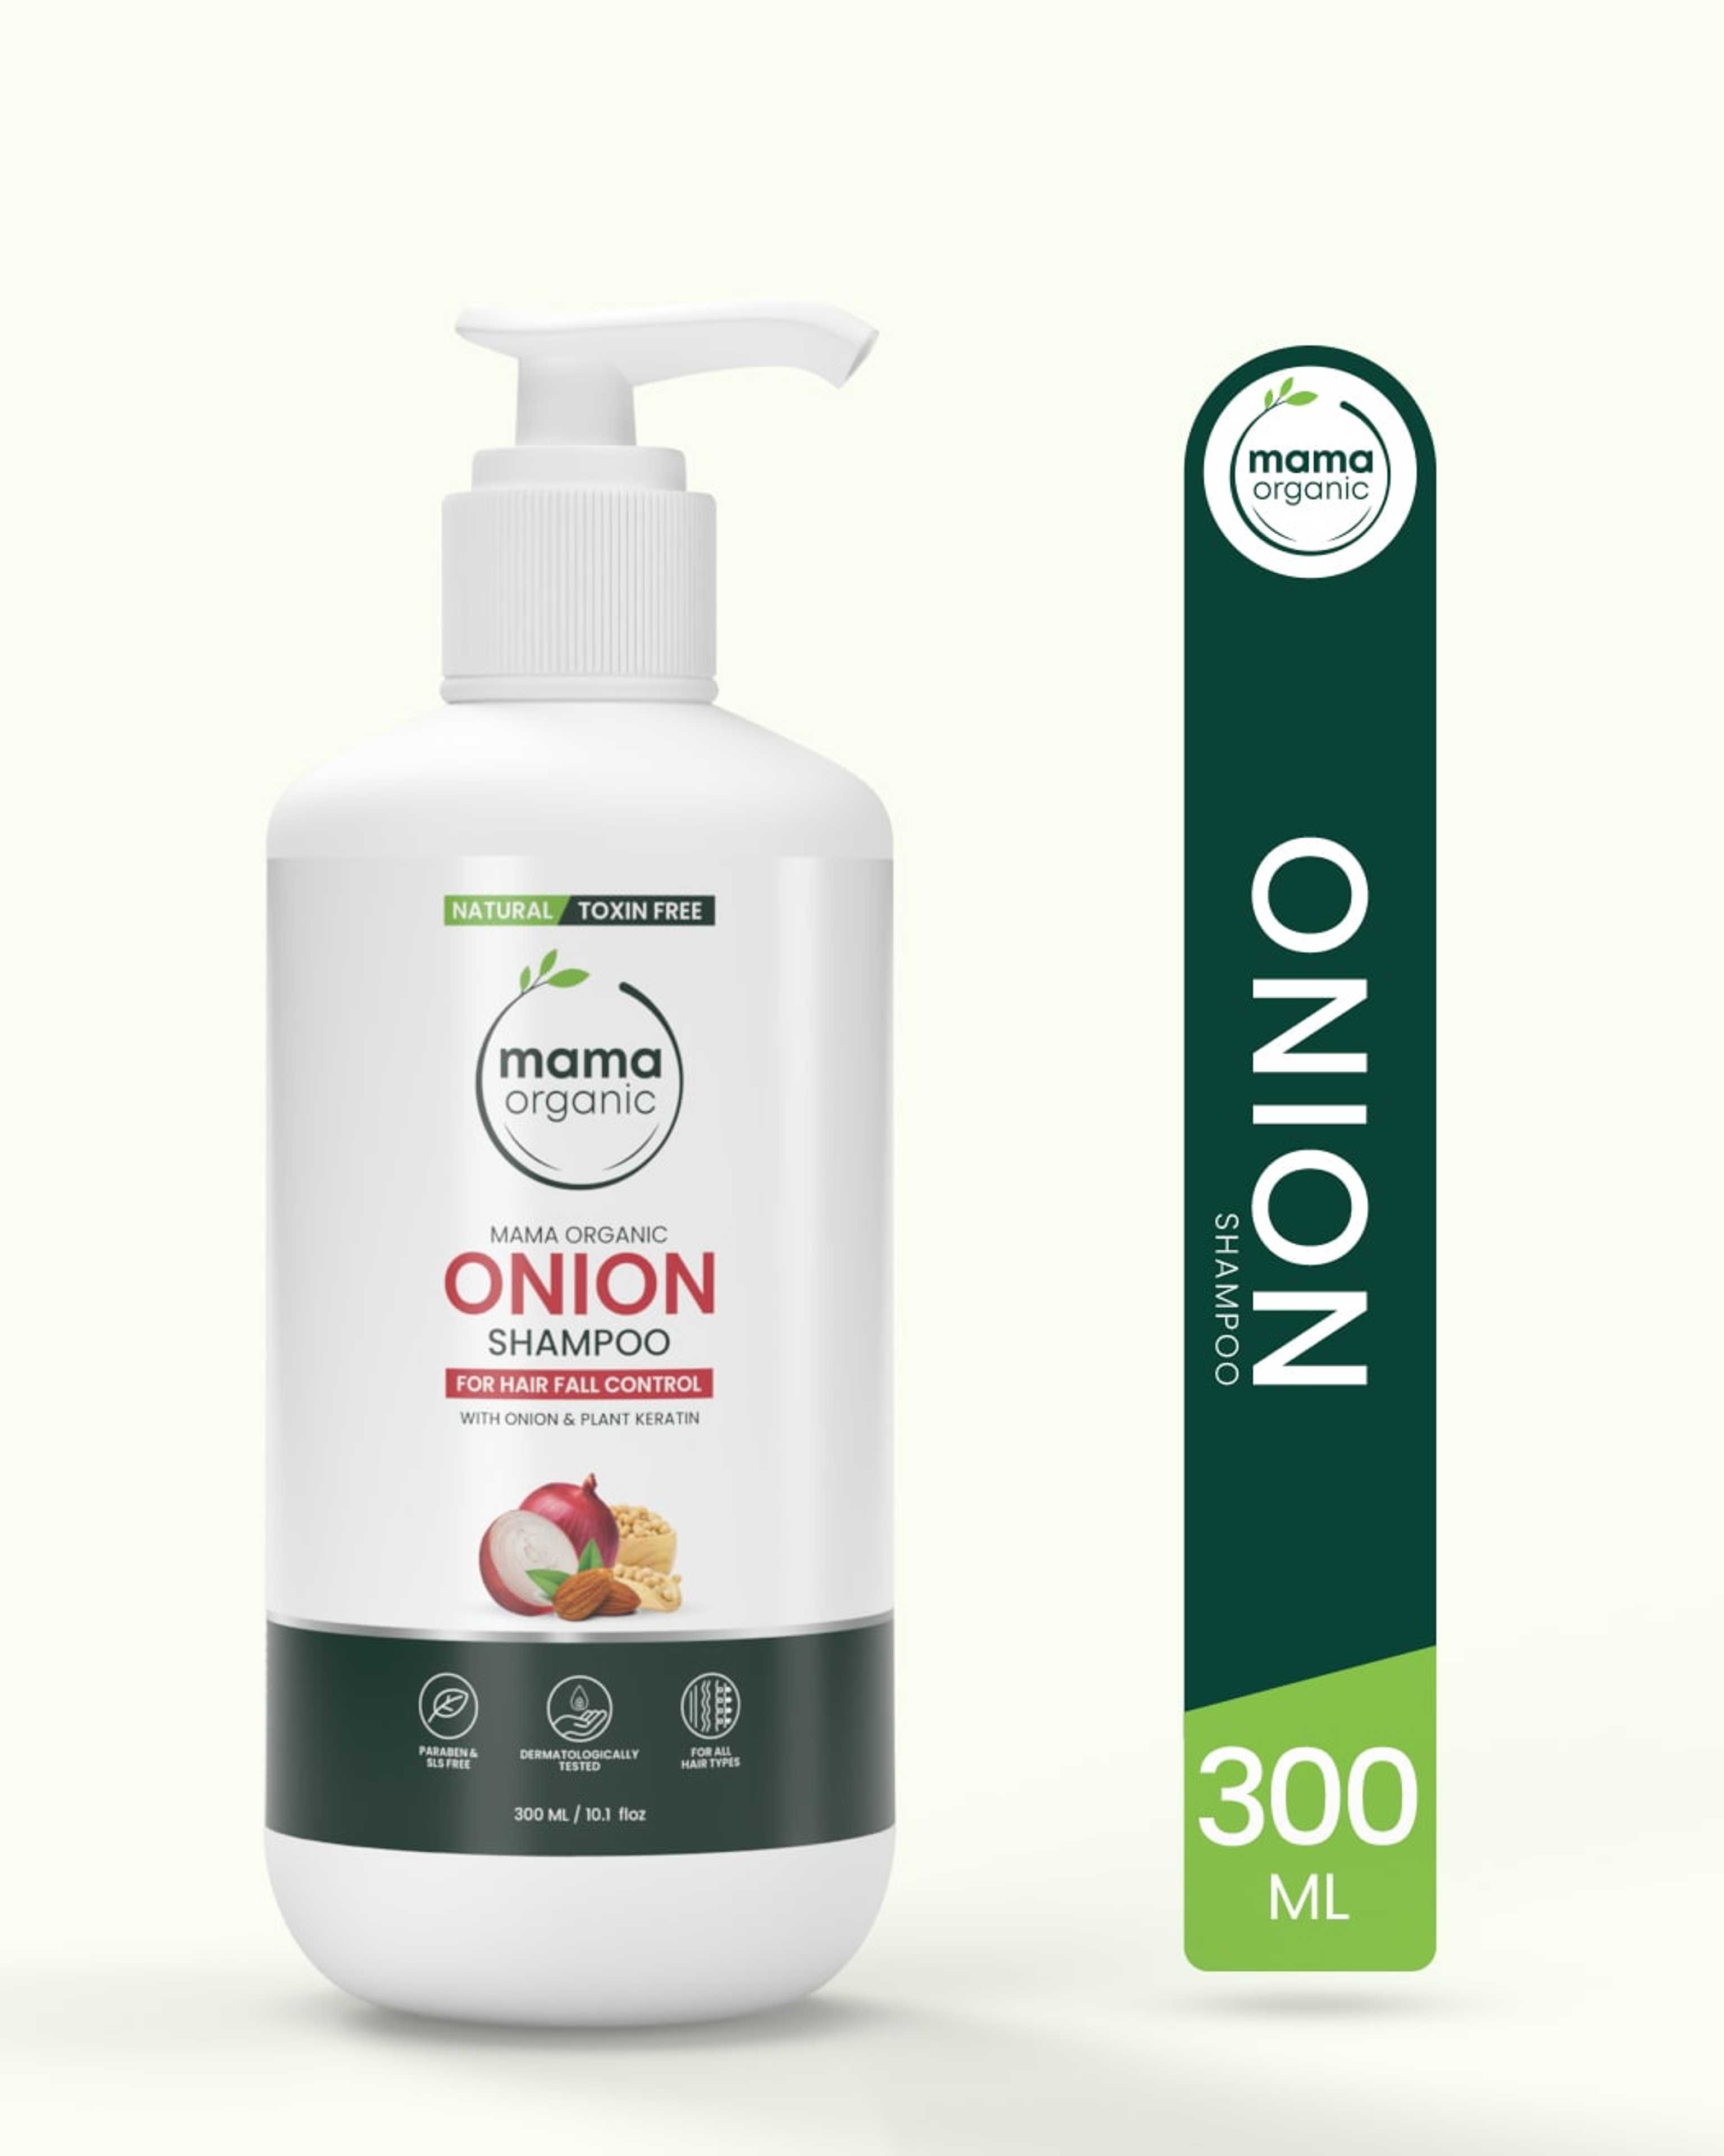 Mama Organic Onion Shampoo for Hair | For Hair Growth | For Men & Women | Natural & Toxin-Free - 300ml